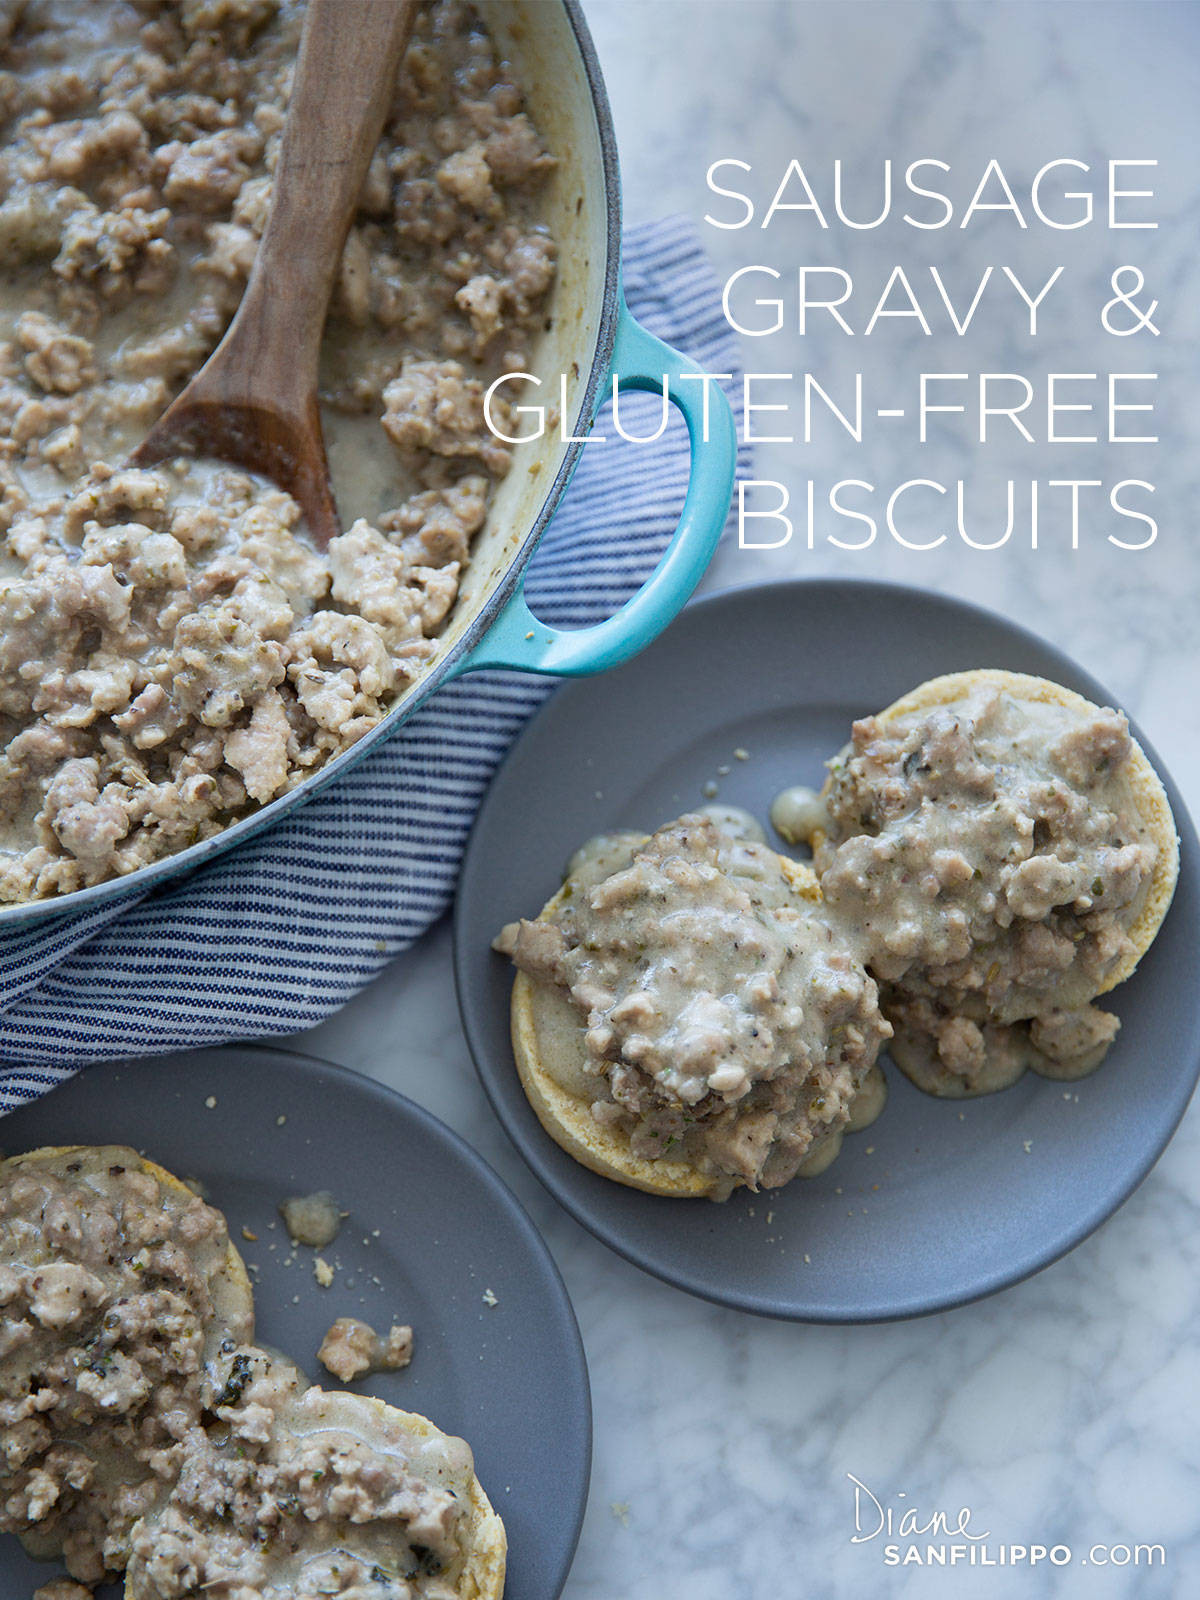 Gluten Free Sausage Gravy
 Gluten Free Sausage Gravy and Biscuits Diane Sanfilippo